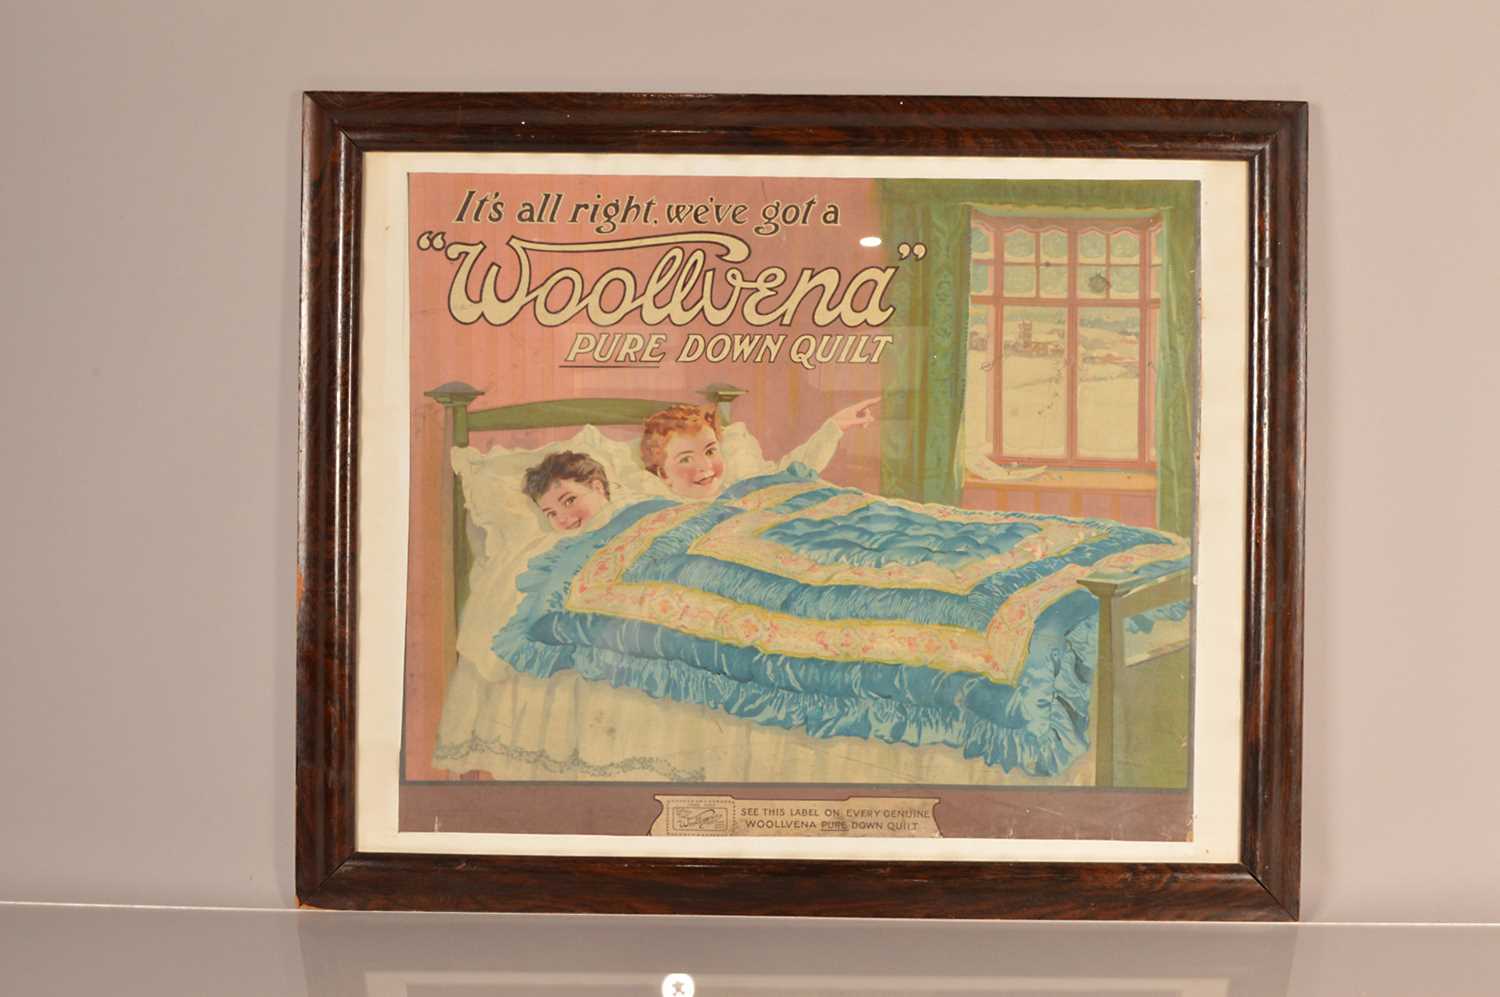 Lot 85 - A Woollvena Pure Down Quilt Advertising poster